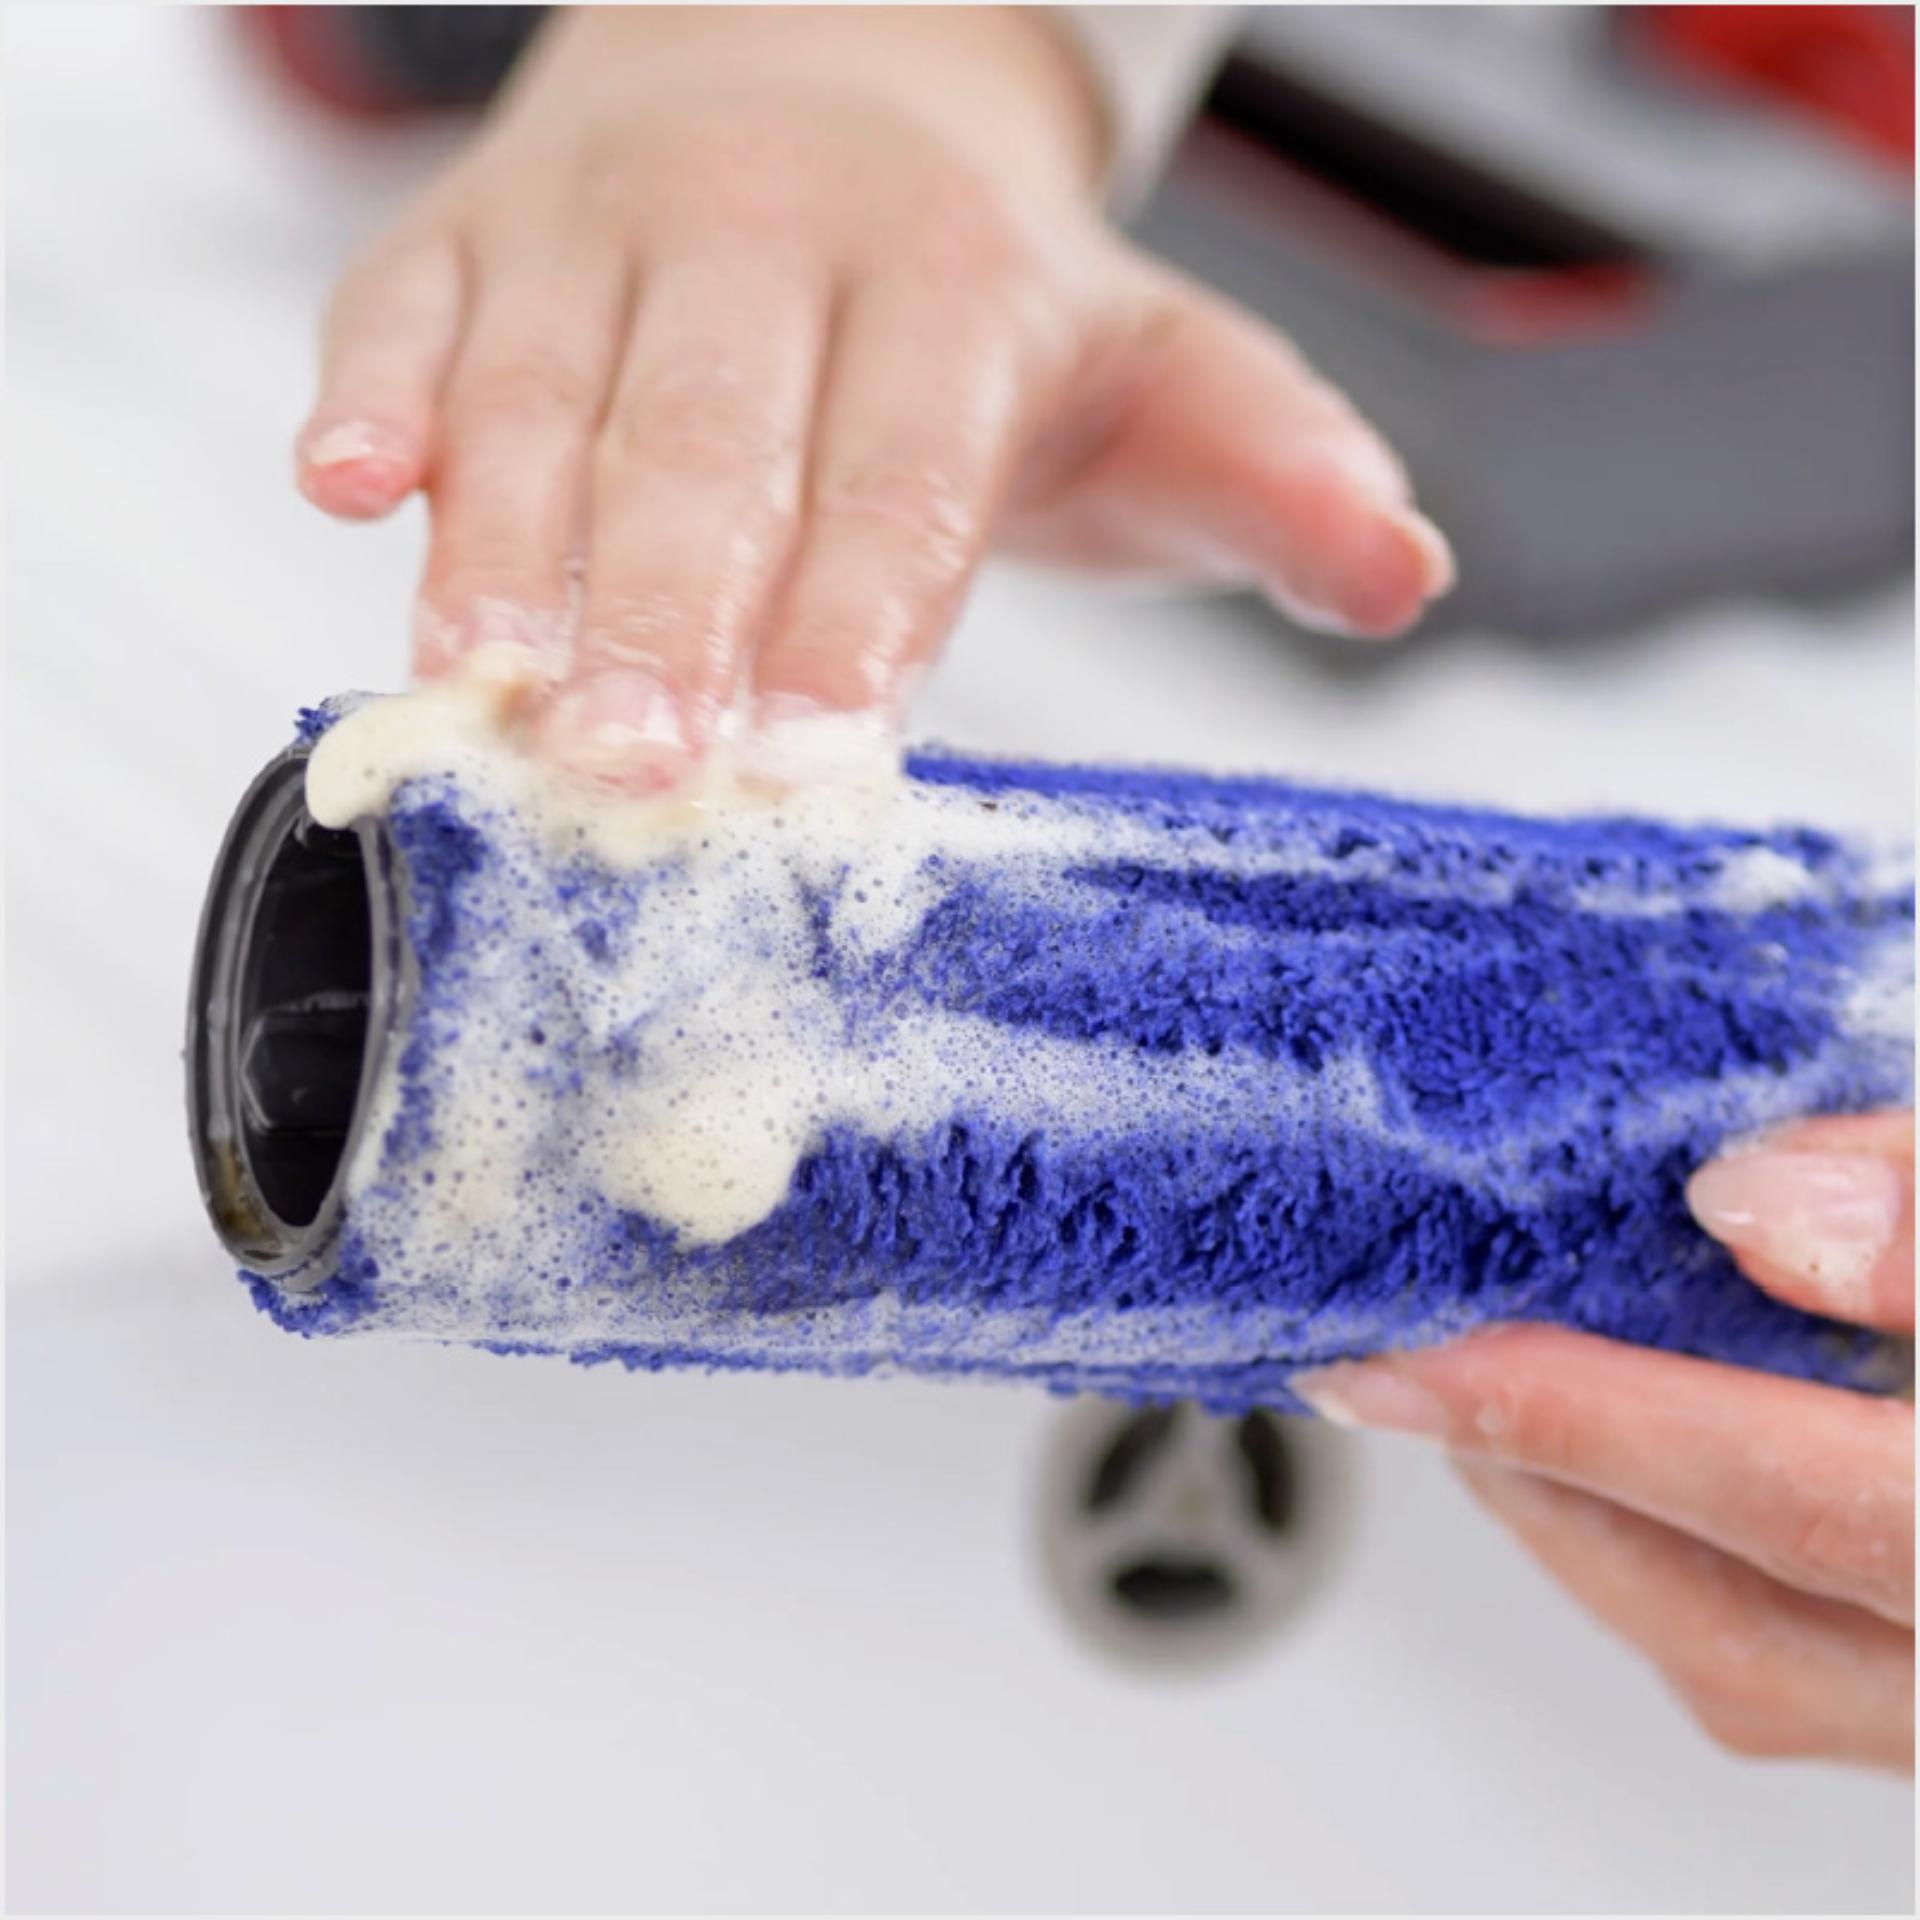 Wet roller is washed with diluted detergent.